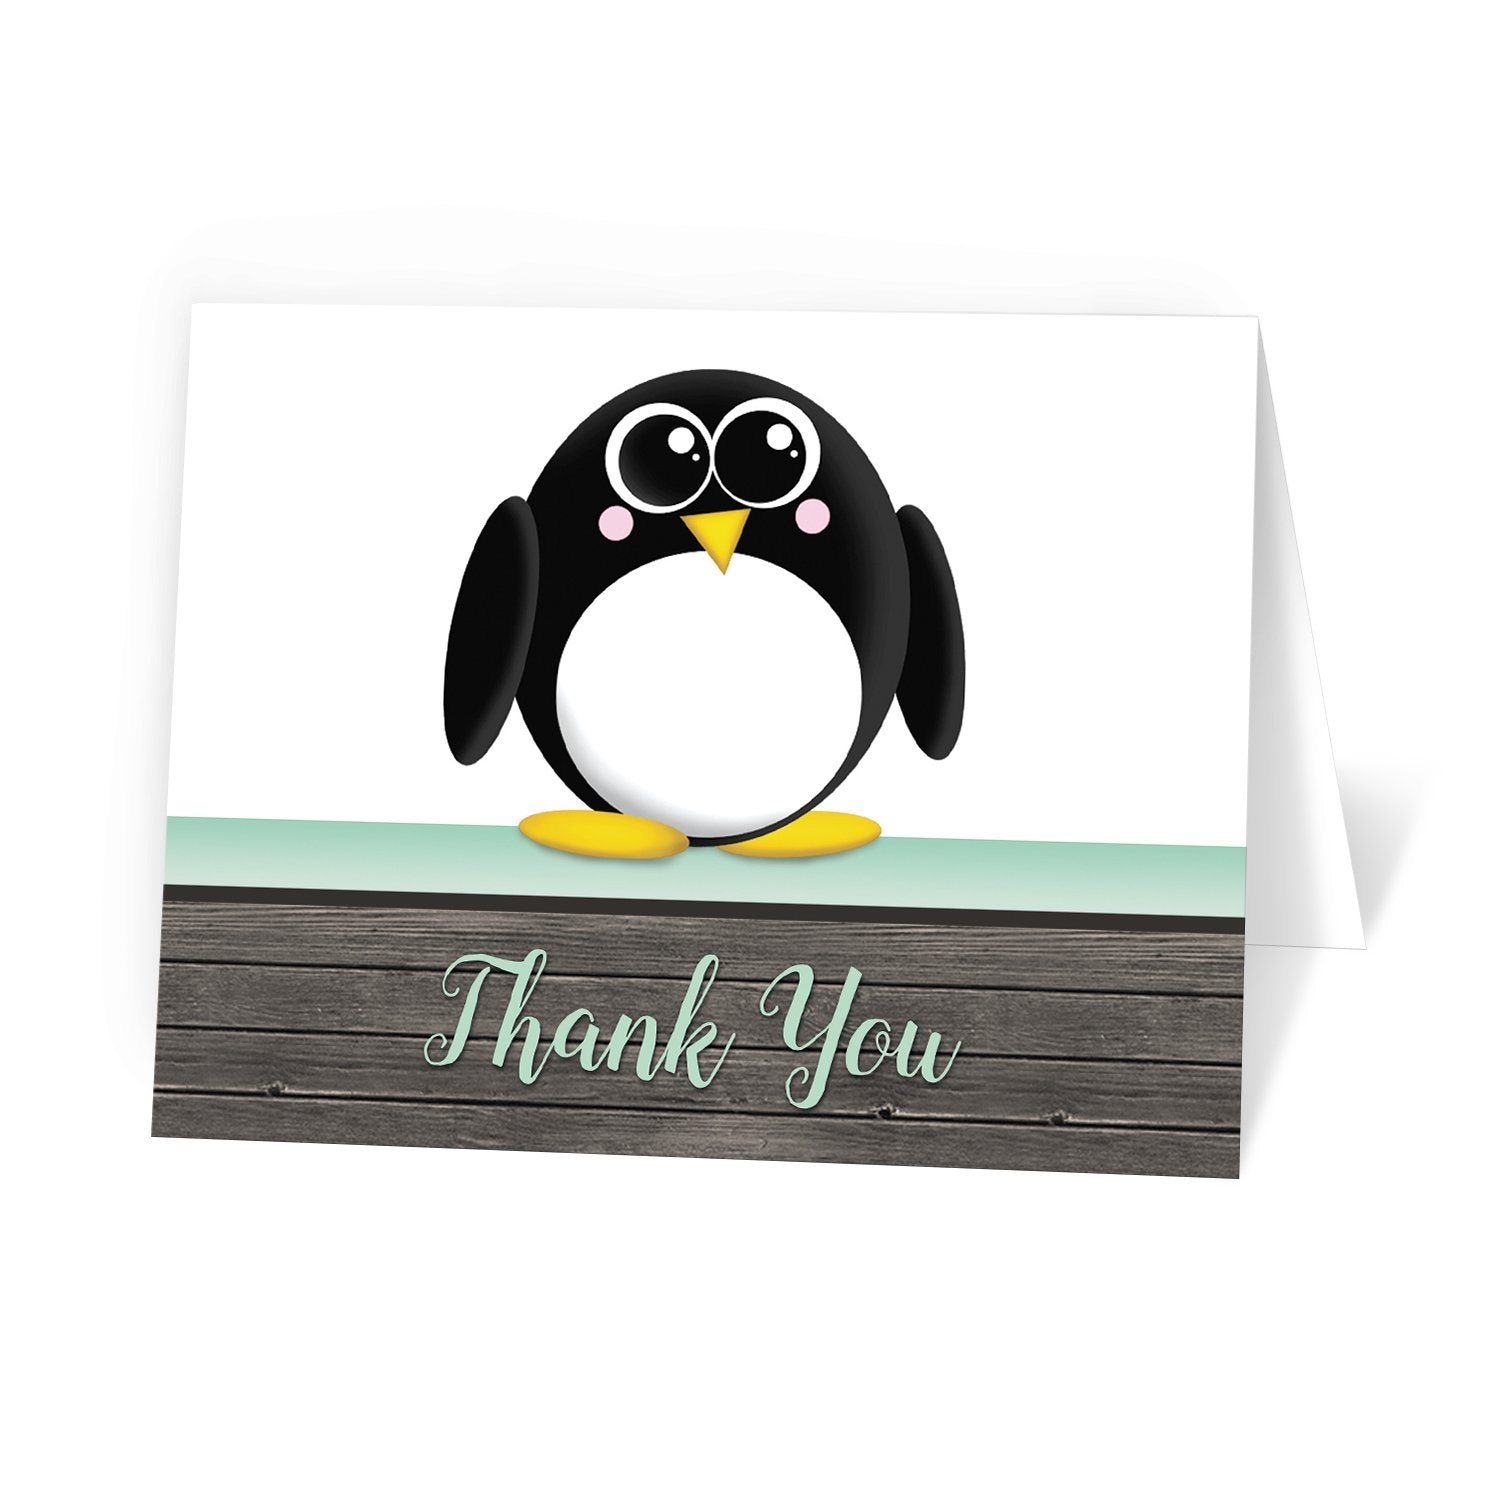 Cute Penguin Mint Green Rustic Wood Thank You Cards at Artistically Invited